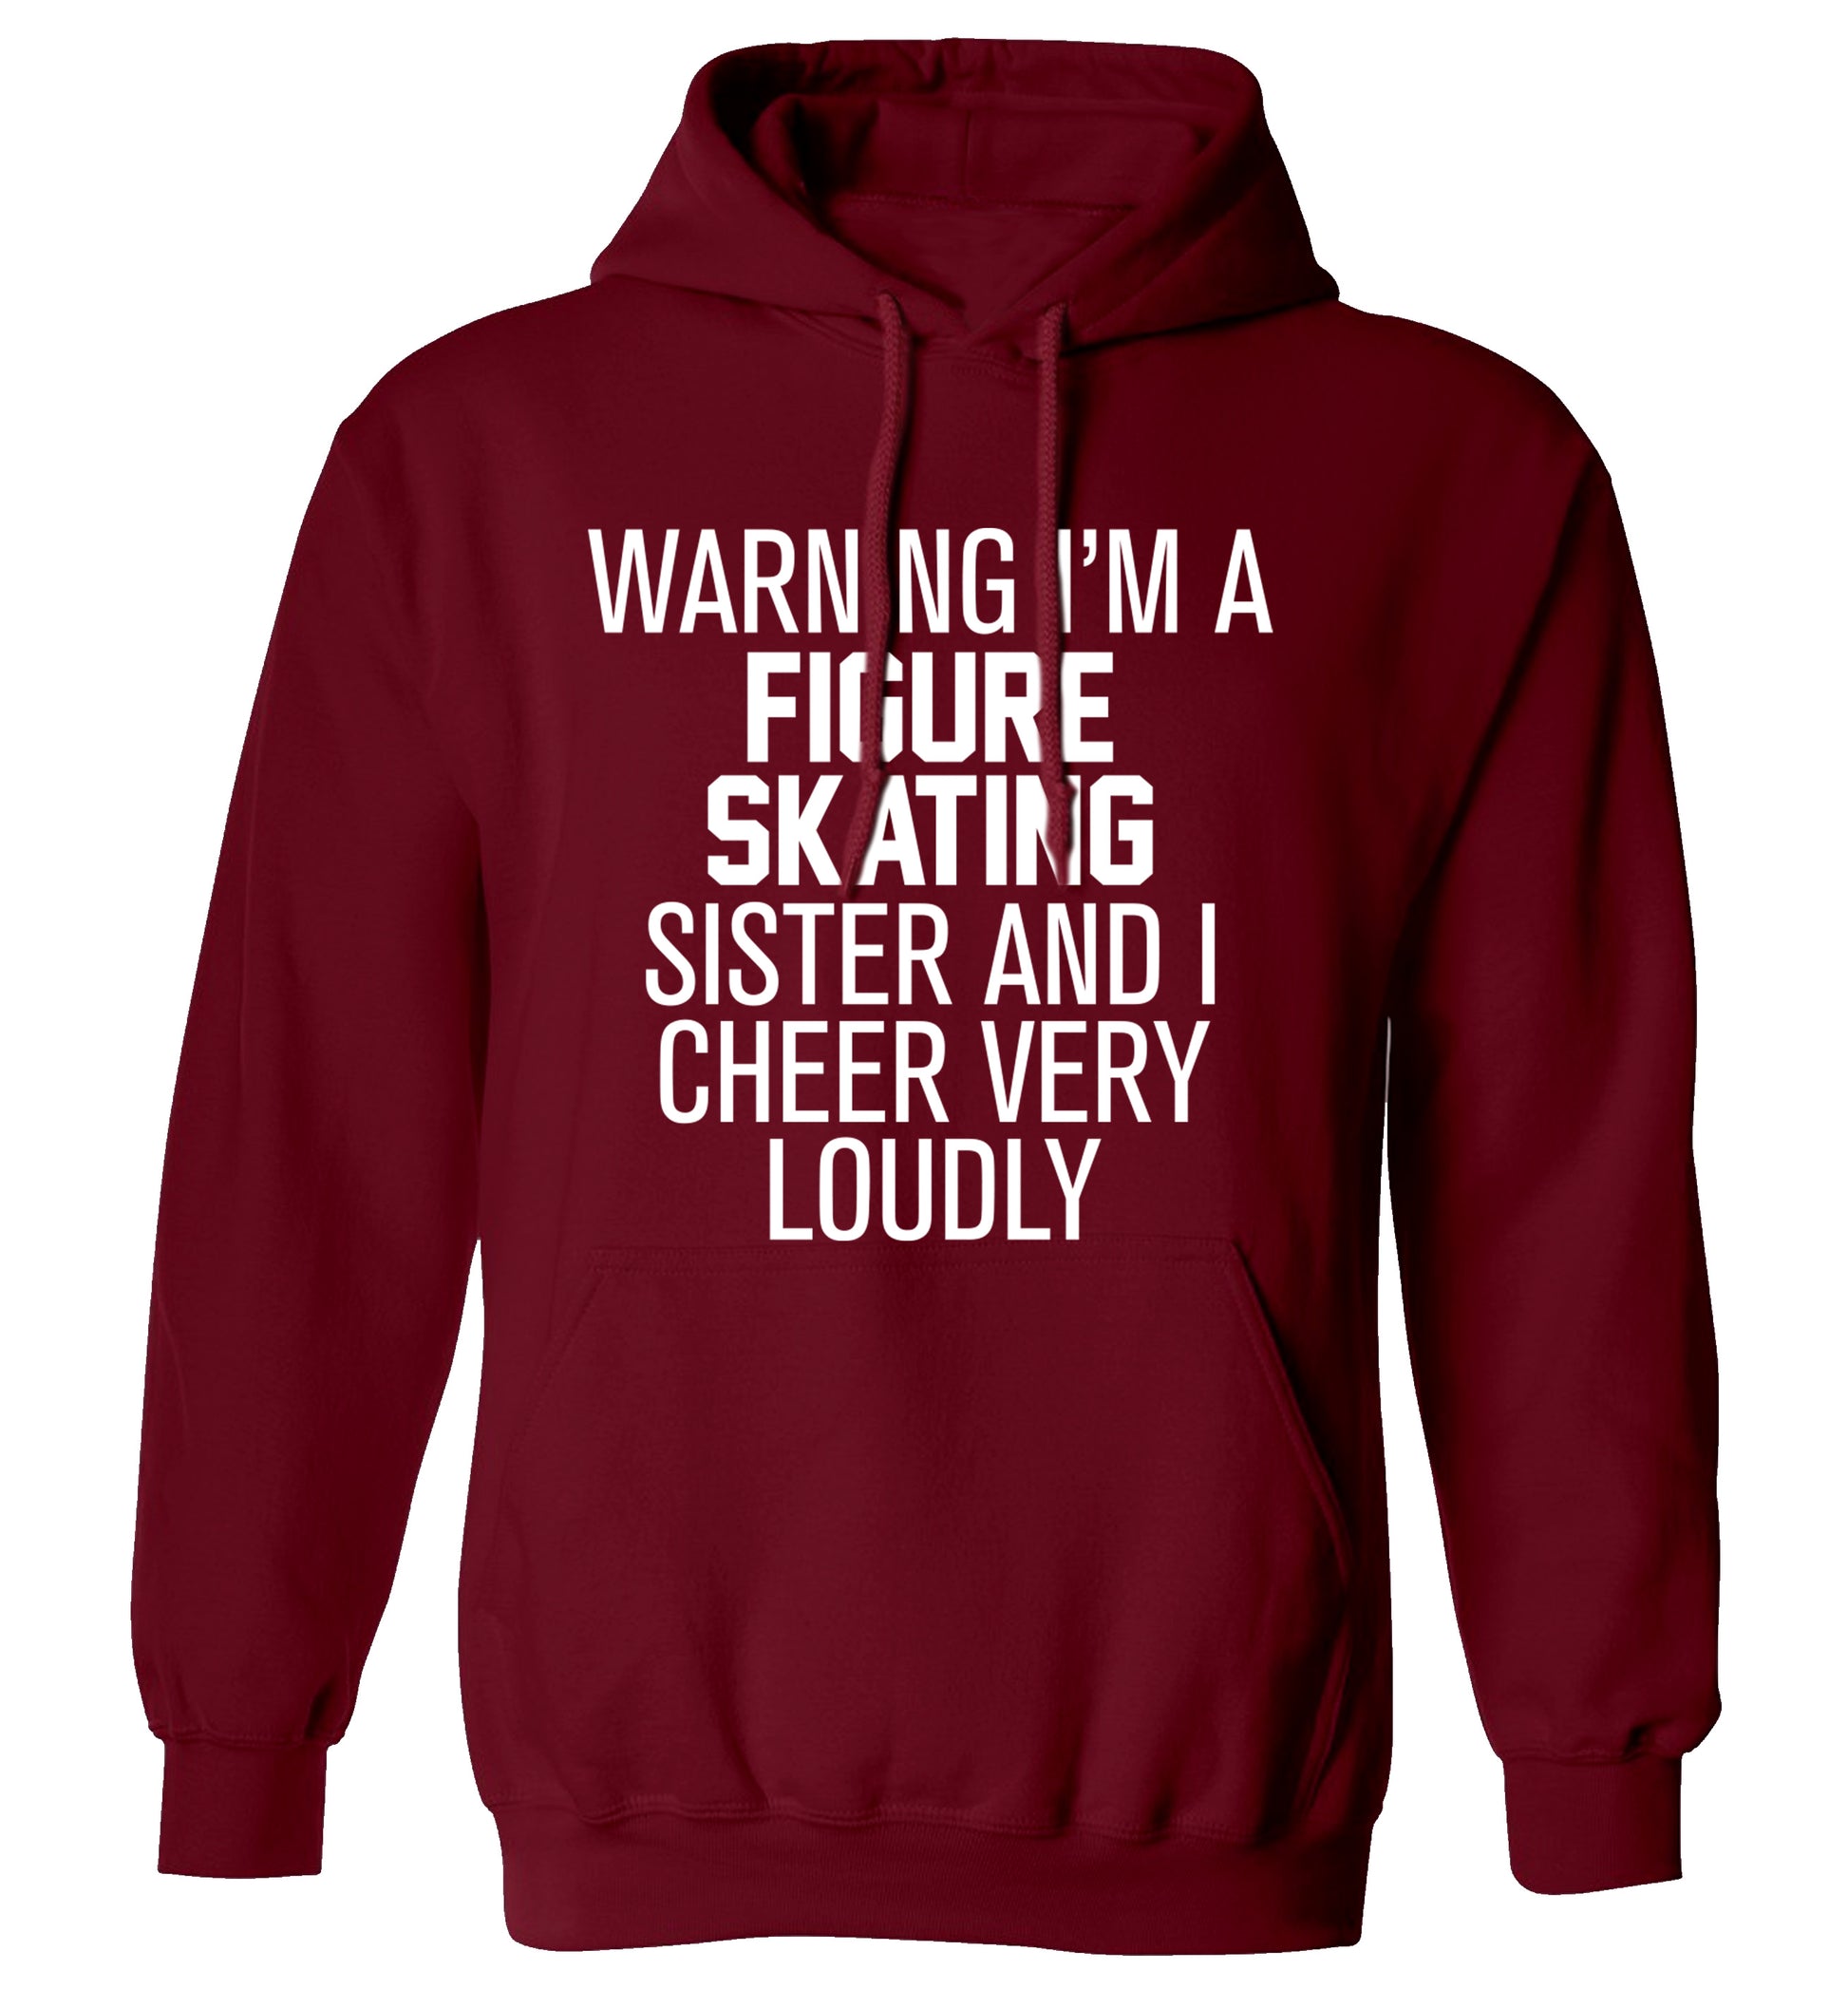 Warning I'm a figure skating sister and I cheer very loudly adults unisexmaroon hoodie 2XL